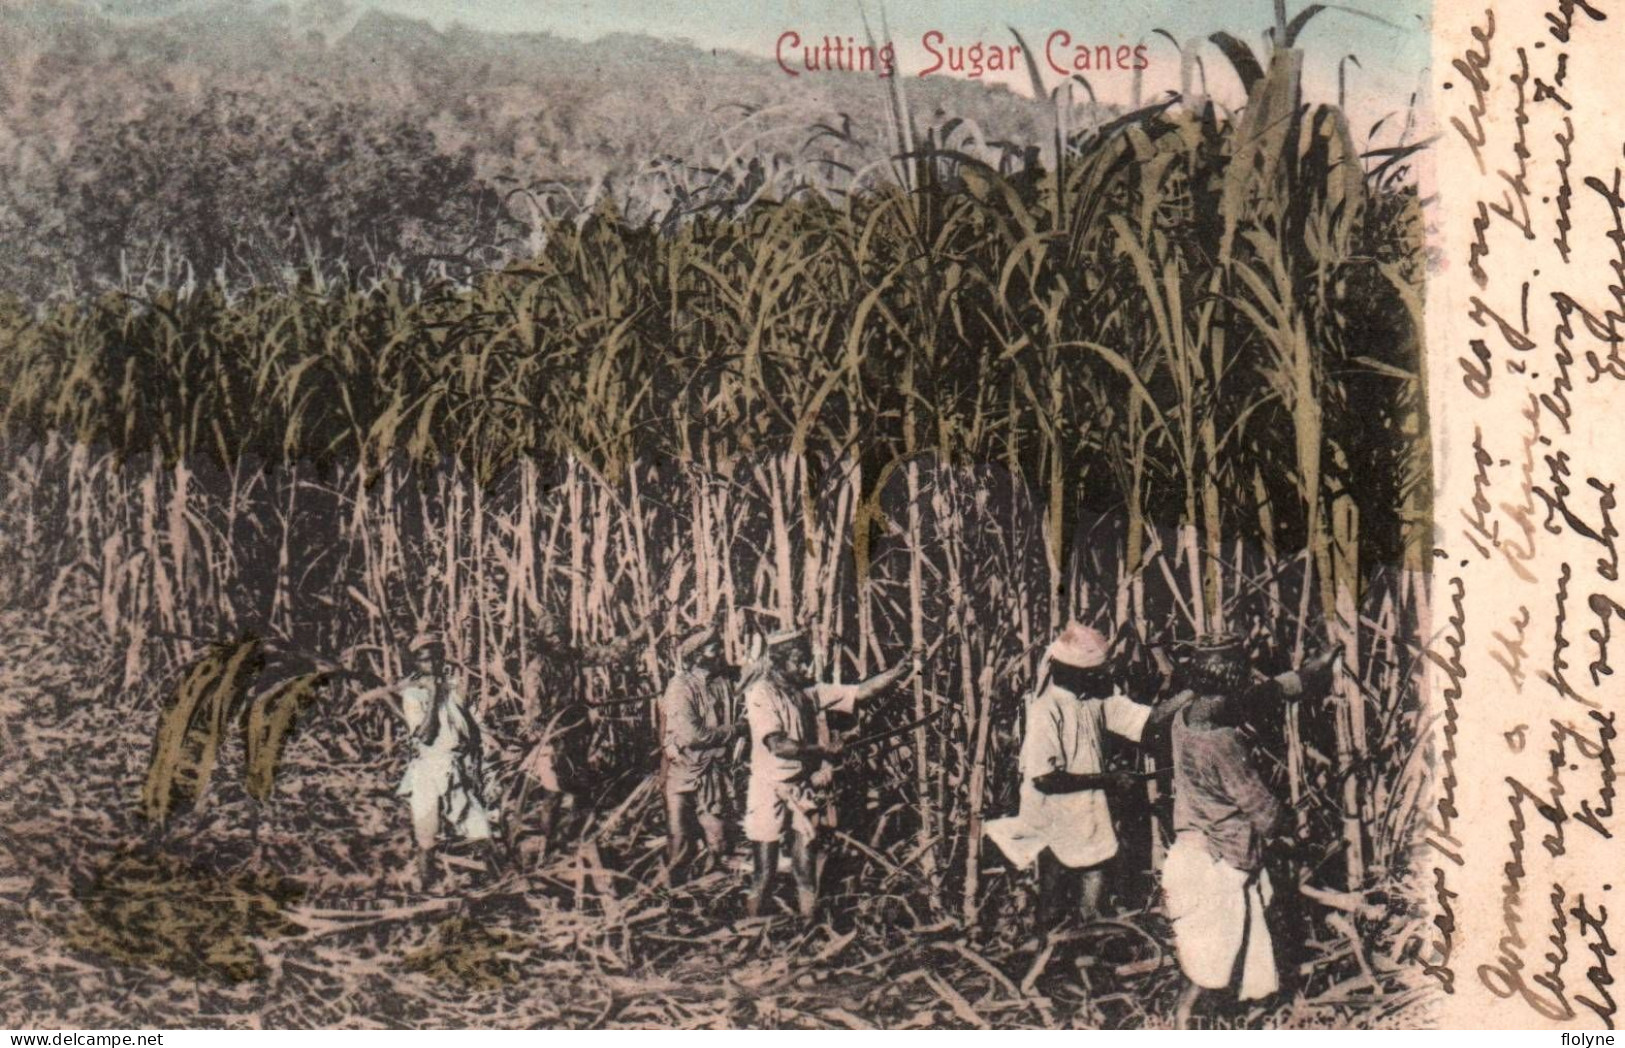 Durban ? - Cutting Sugar Canes - Cannes à Sucre - Afrique Du Sud South Africa Transvaal - South Africa